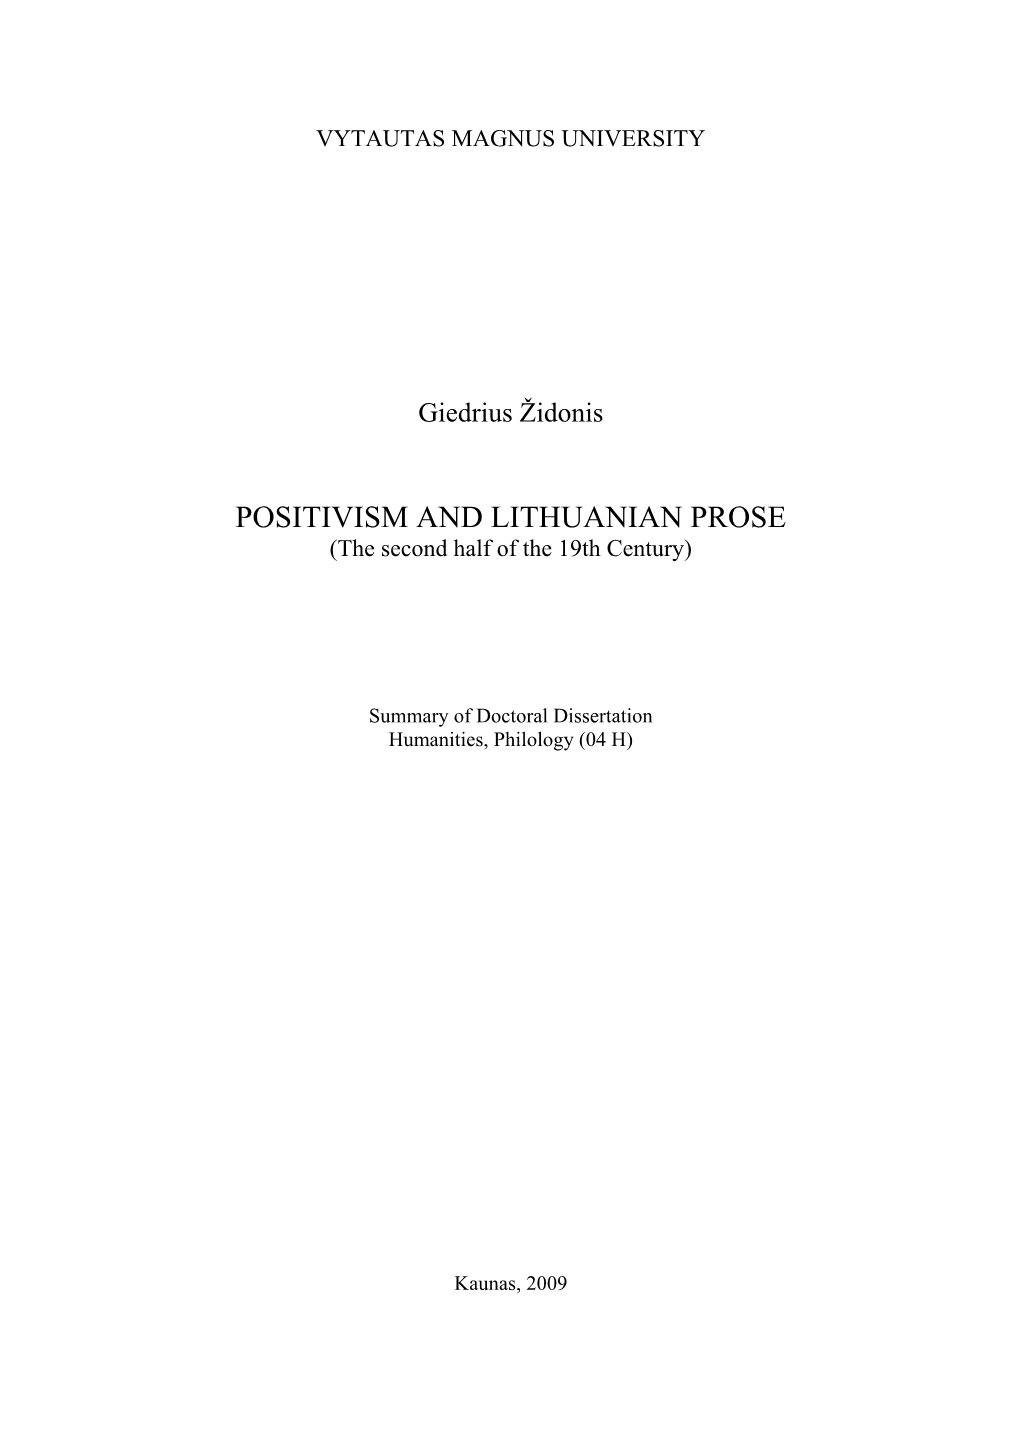 POSITIVISM and LITHUANIAN PROSE (The Second Half of the 19Th Century)